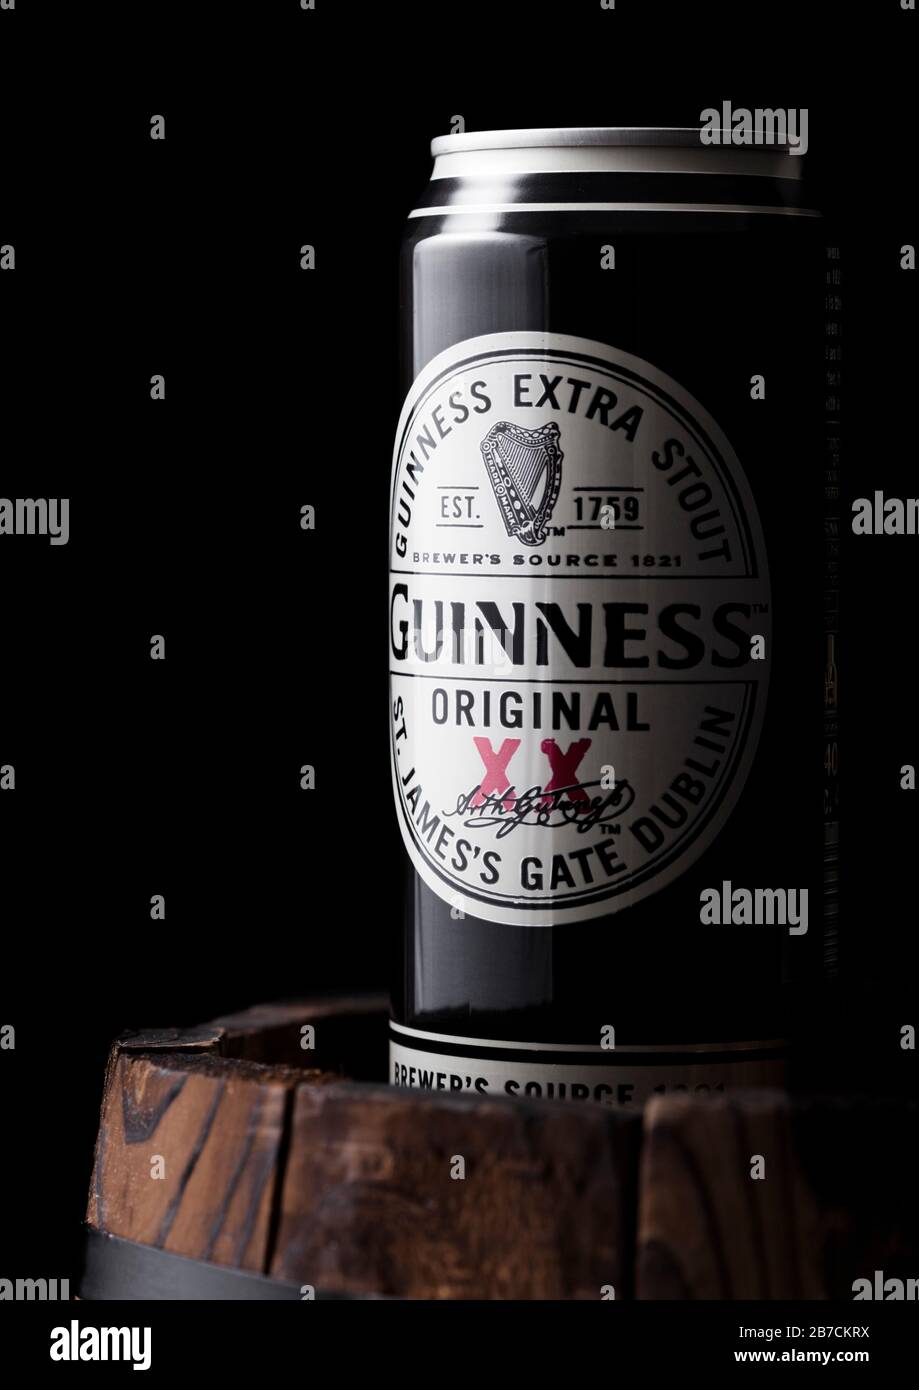 LONDON, UK - APRIL 27, 2018: Aluminium can of Guinness original stout beer on top of old wooden barrel. Guinness beer has been produced since 1759 in Stock Photo